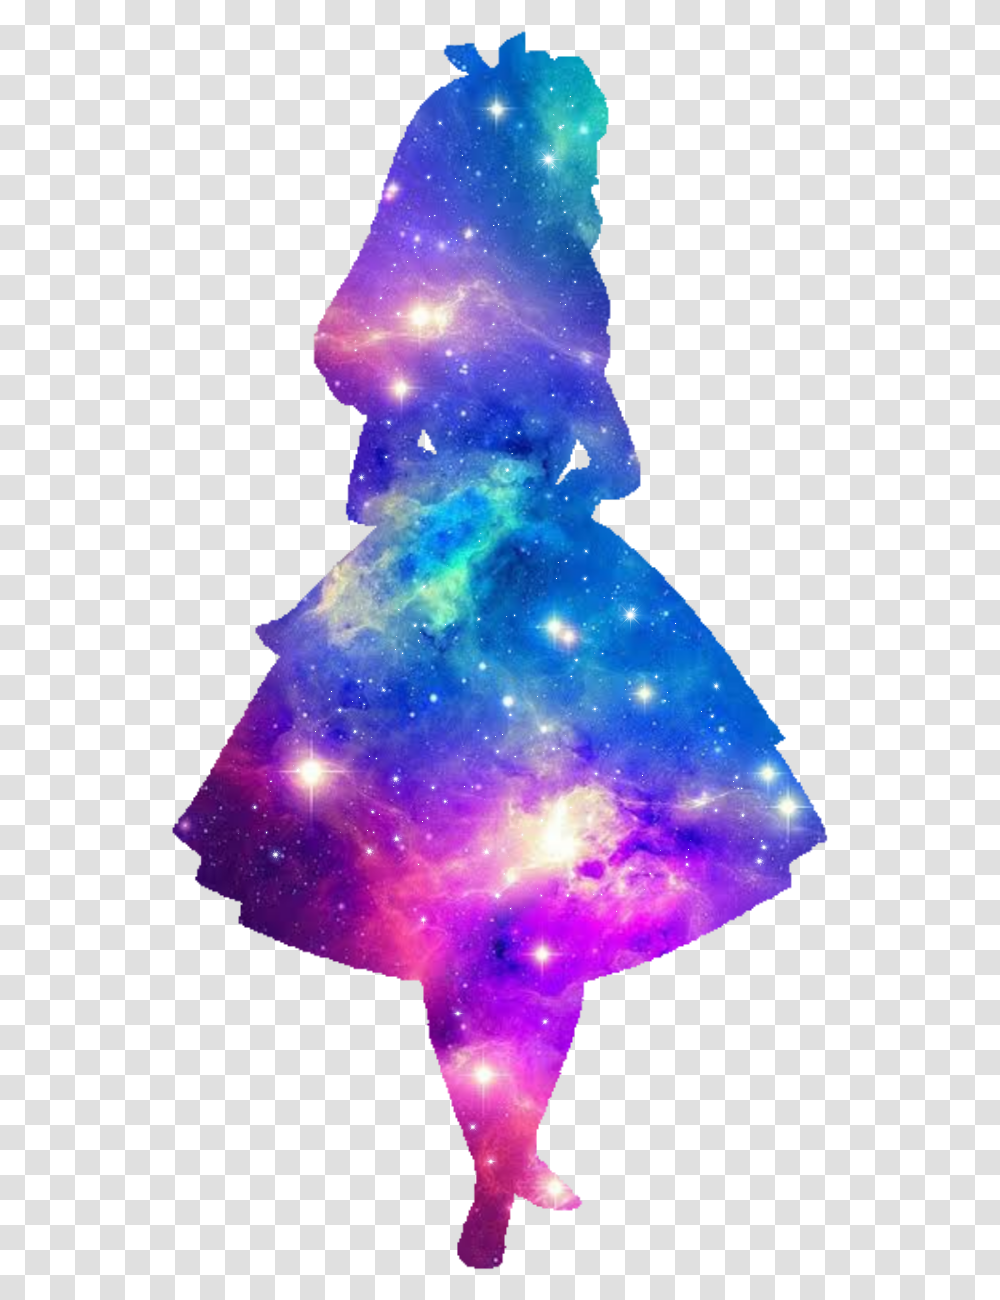 Alicia Galaxia Silueta Silhouette Galaxy Backgrounds For Phones, Nature, Outdoors, Crystal, Snow Transparent Png